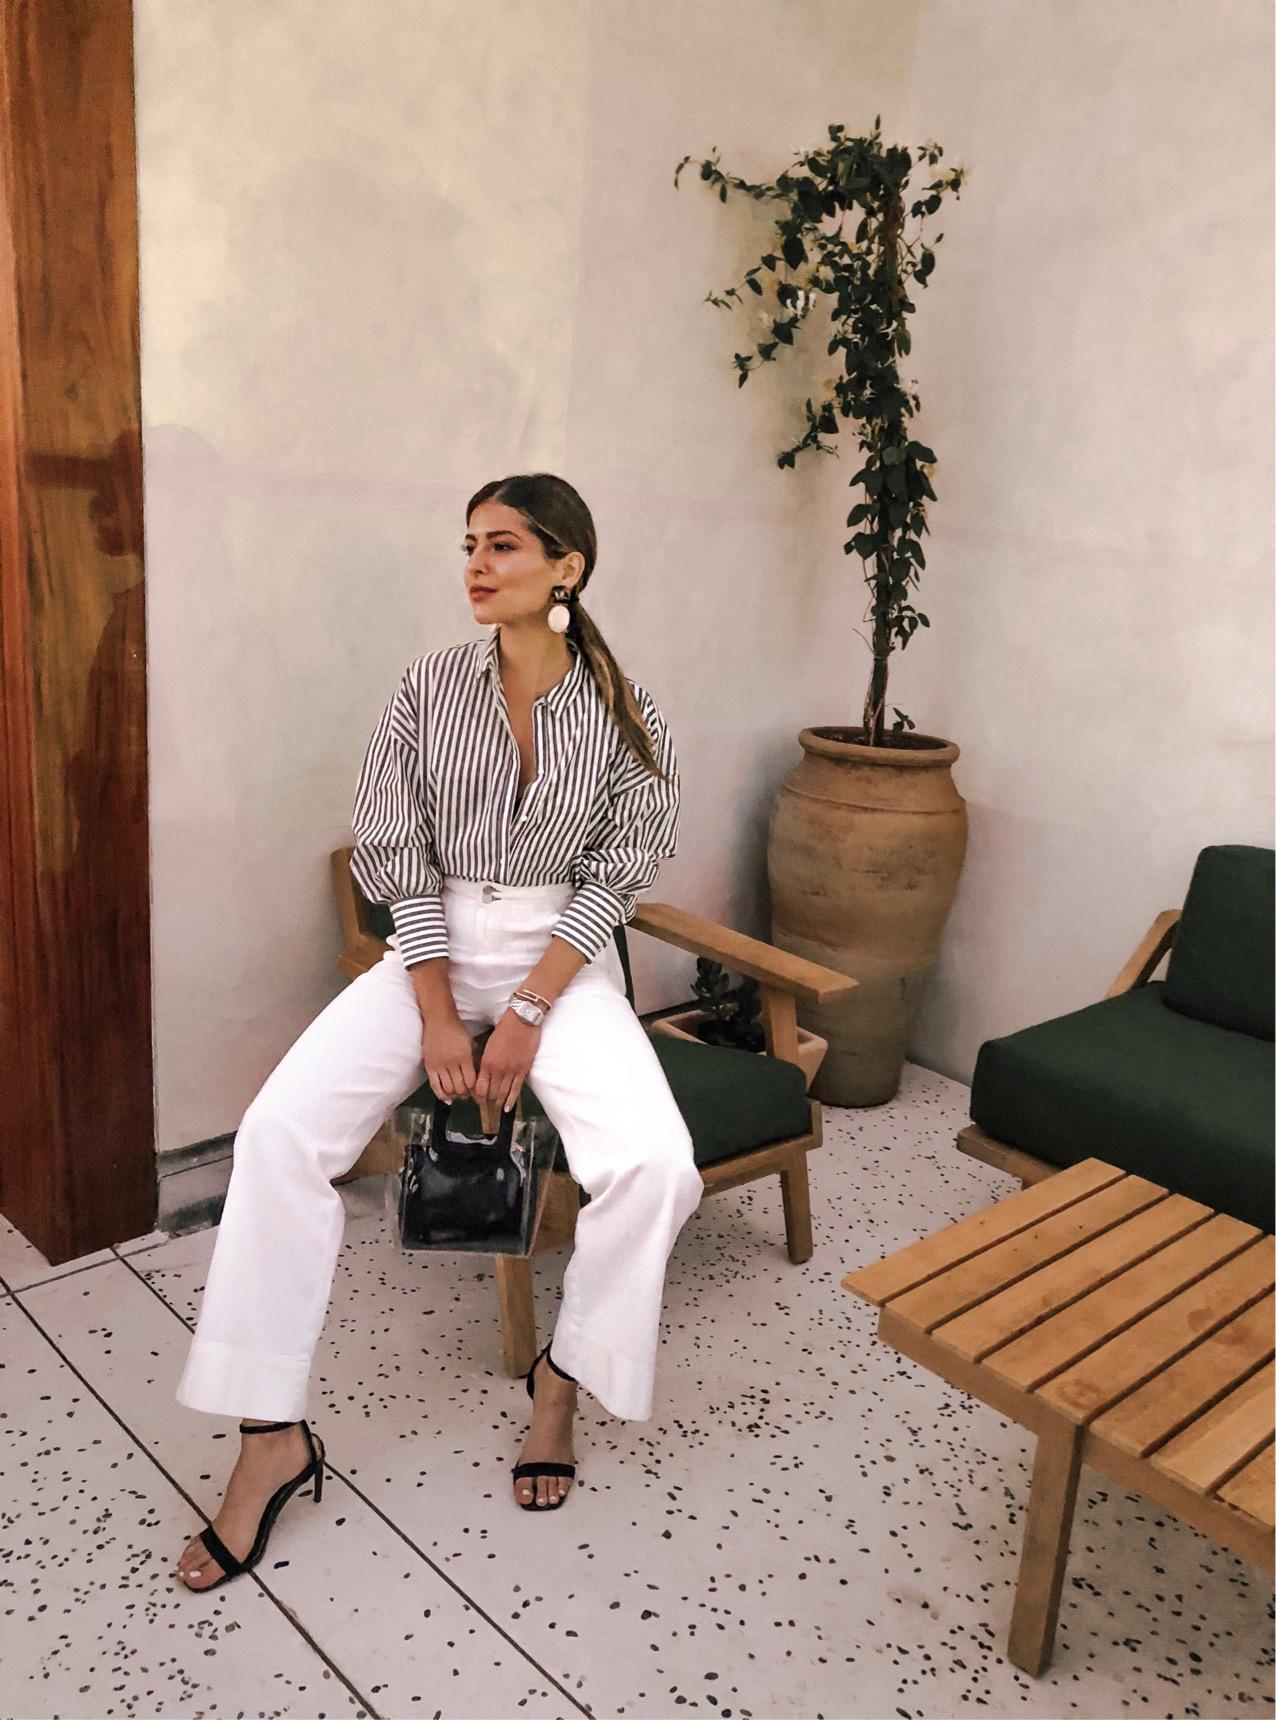 The Fashion Brands I've Been Obsessed With by Pam Hetlinger | TheGirlFromPanama.com | Nili Lotan Button Down Top, casual summer style, wide leg pants, casual chic, stripe top and jeans